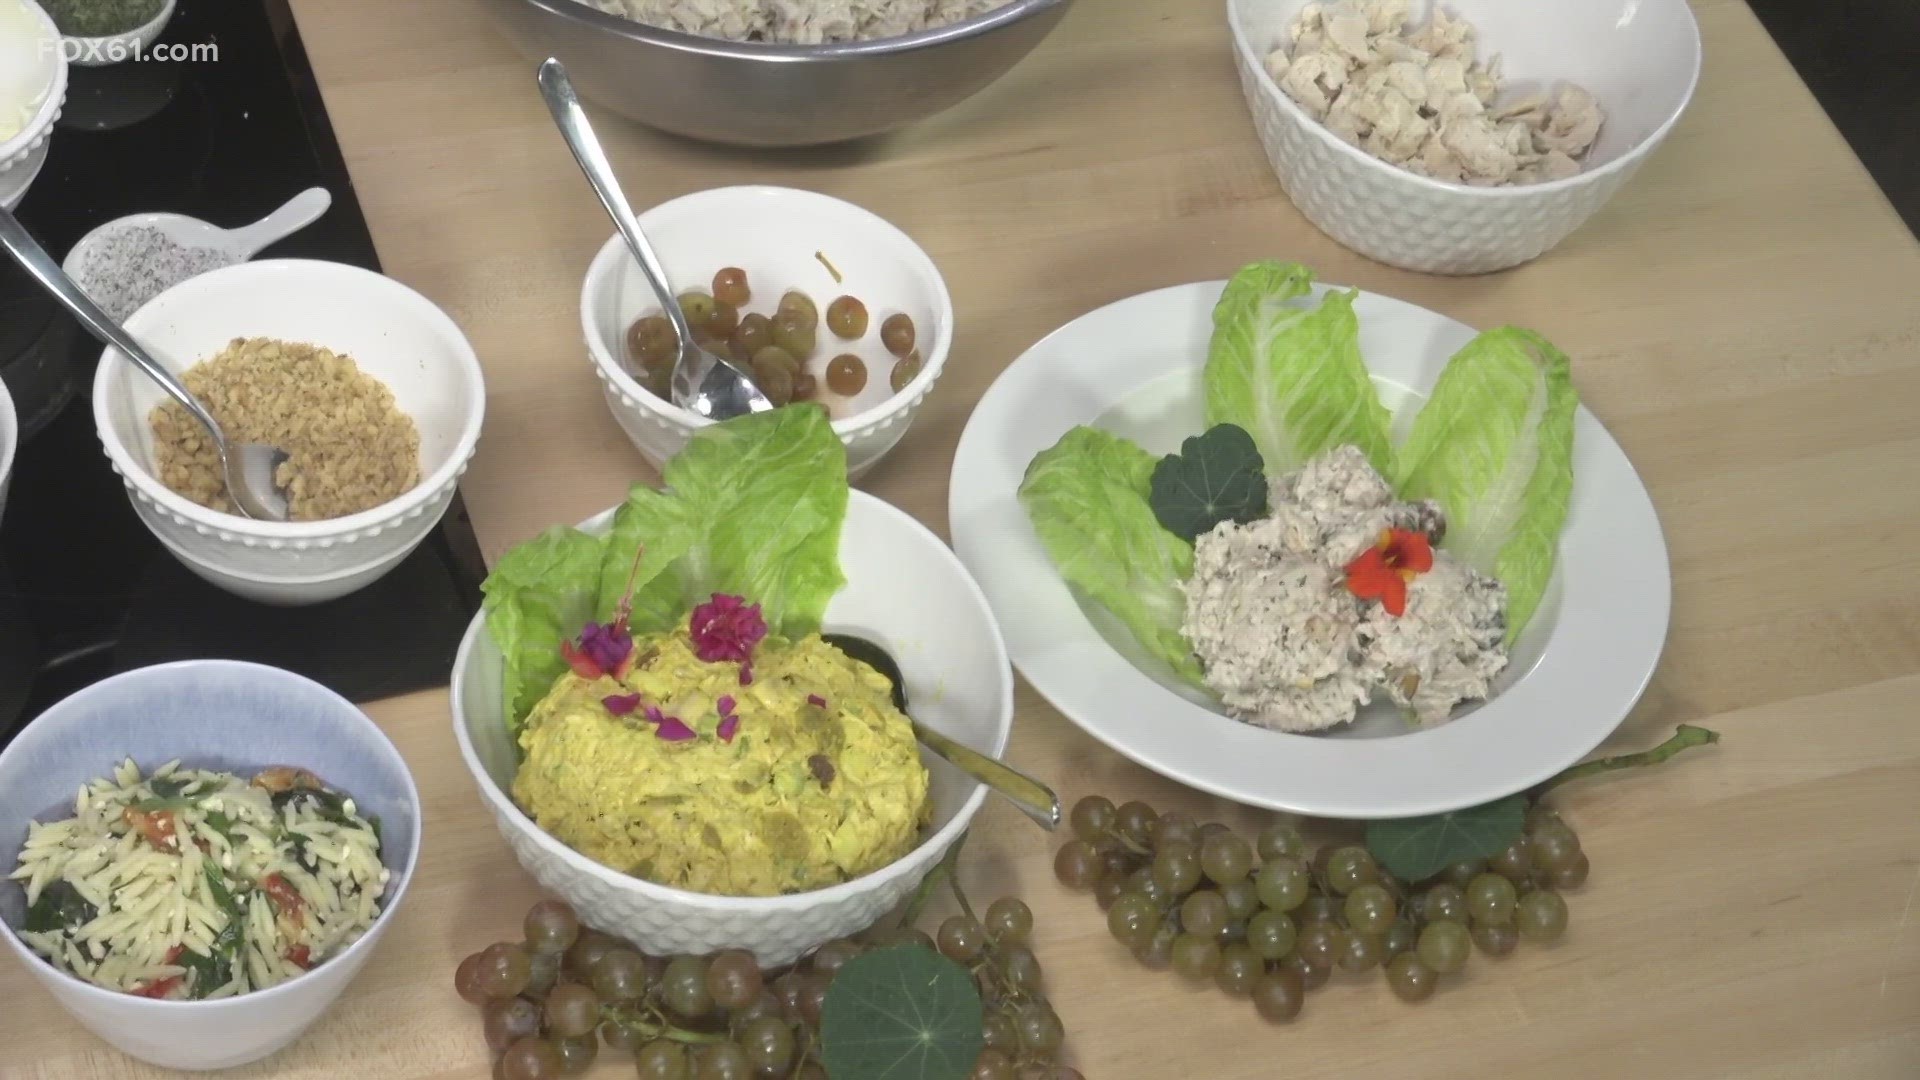 Today's recipe for tarragon chicken salad with grapes and walnuts comes from Café Louise Catering in West Hartford.